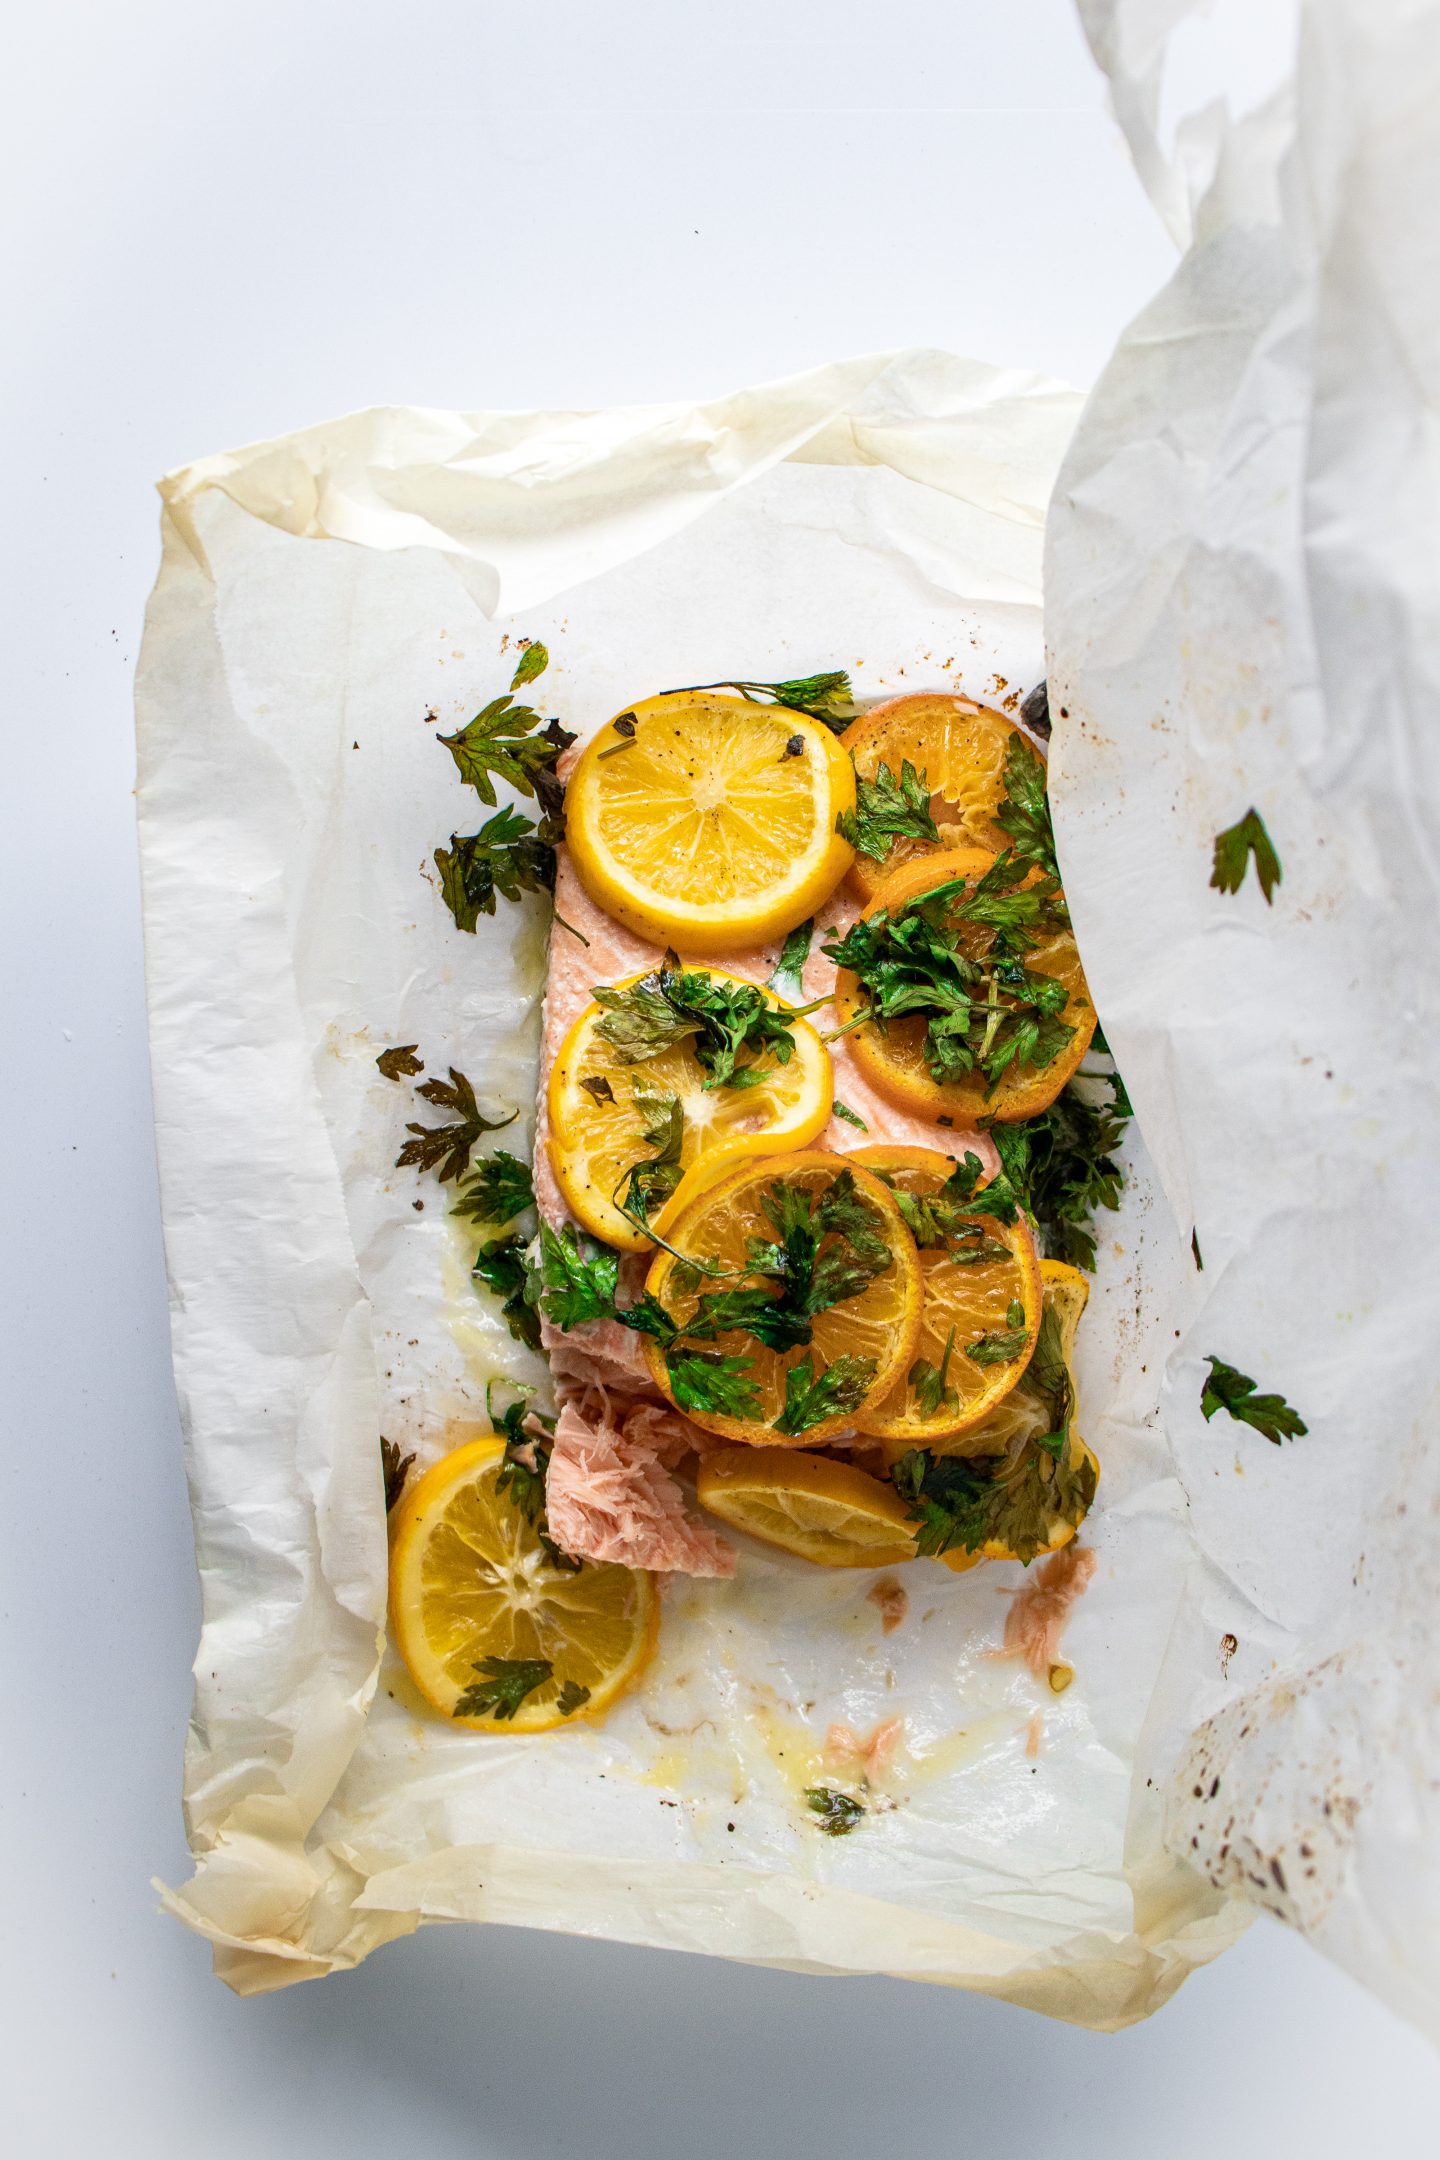 Fish En Papillote (Fish in Paper) with citrus and herbs on www.thedanareneeway.com